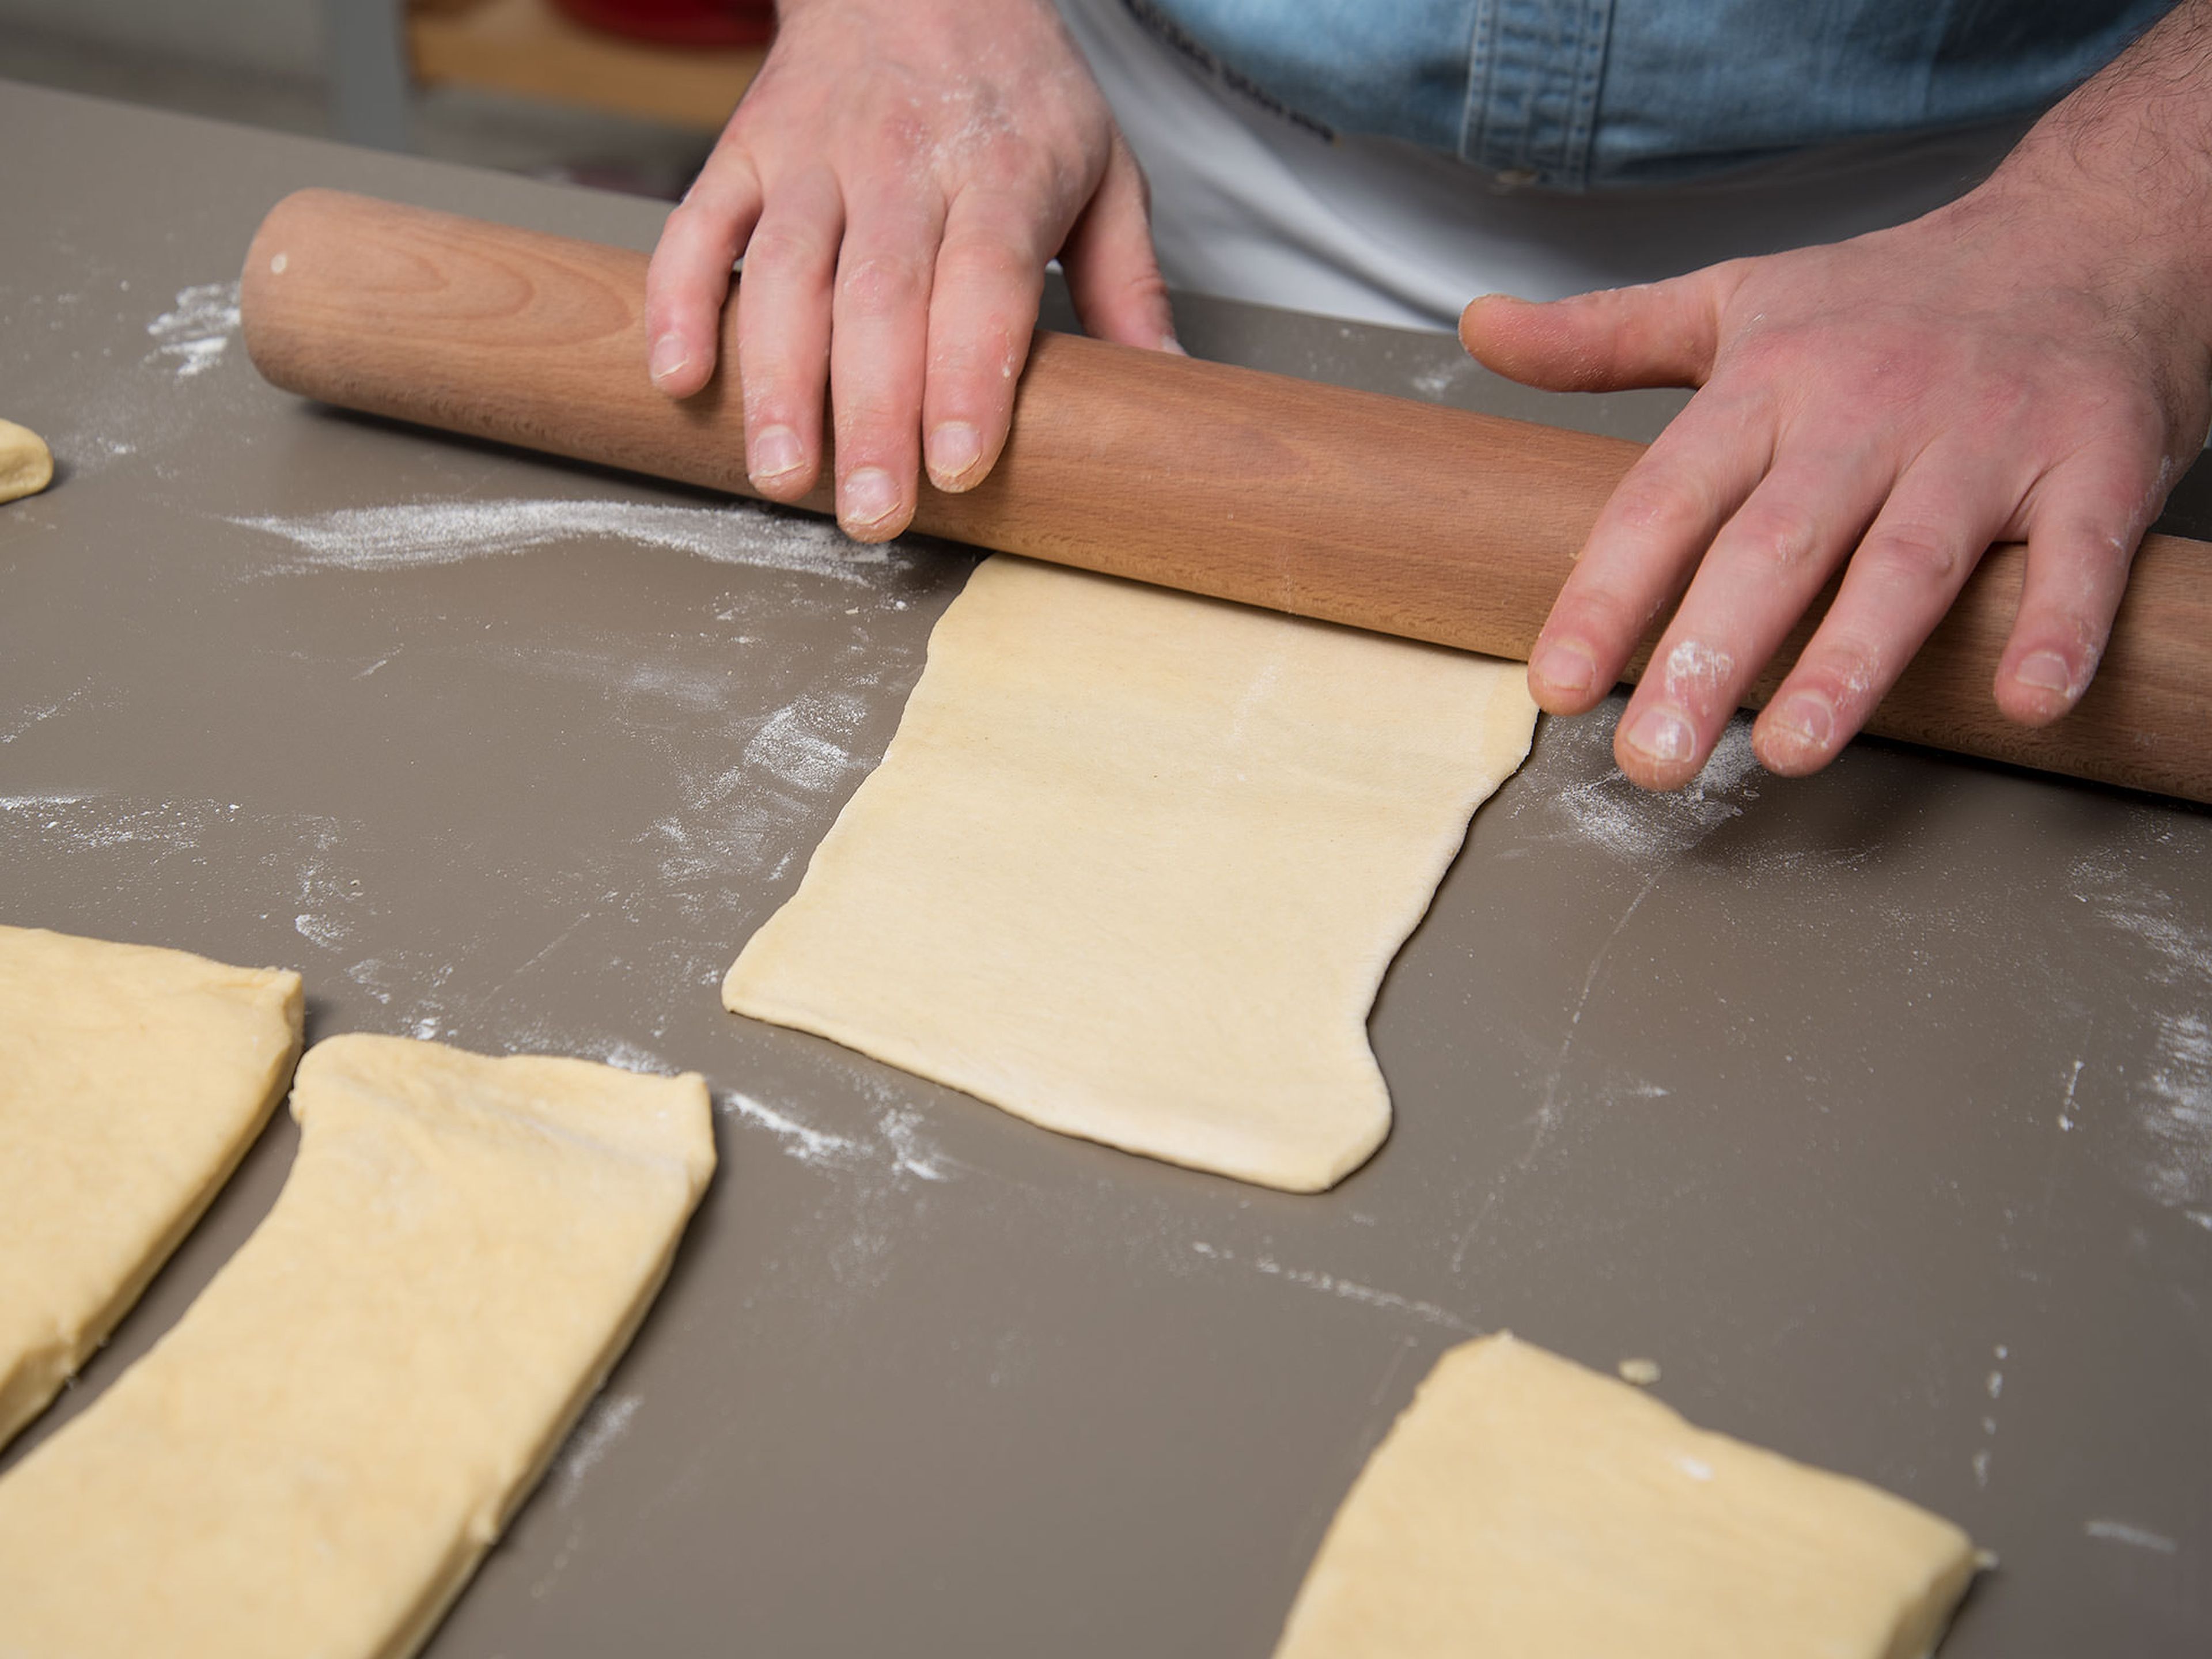 Preheat the oven to 200°C/400°F. Transfer dough to a floured work surface. Knead again briefly, then divide dough into equal parts. Roll out each piece of dough until 20x10 cm/8x4-in. size.